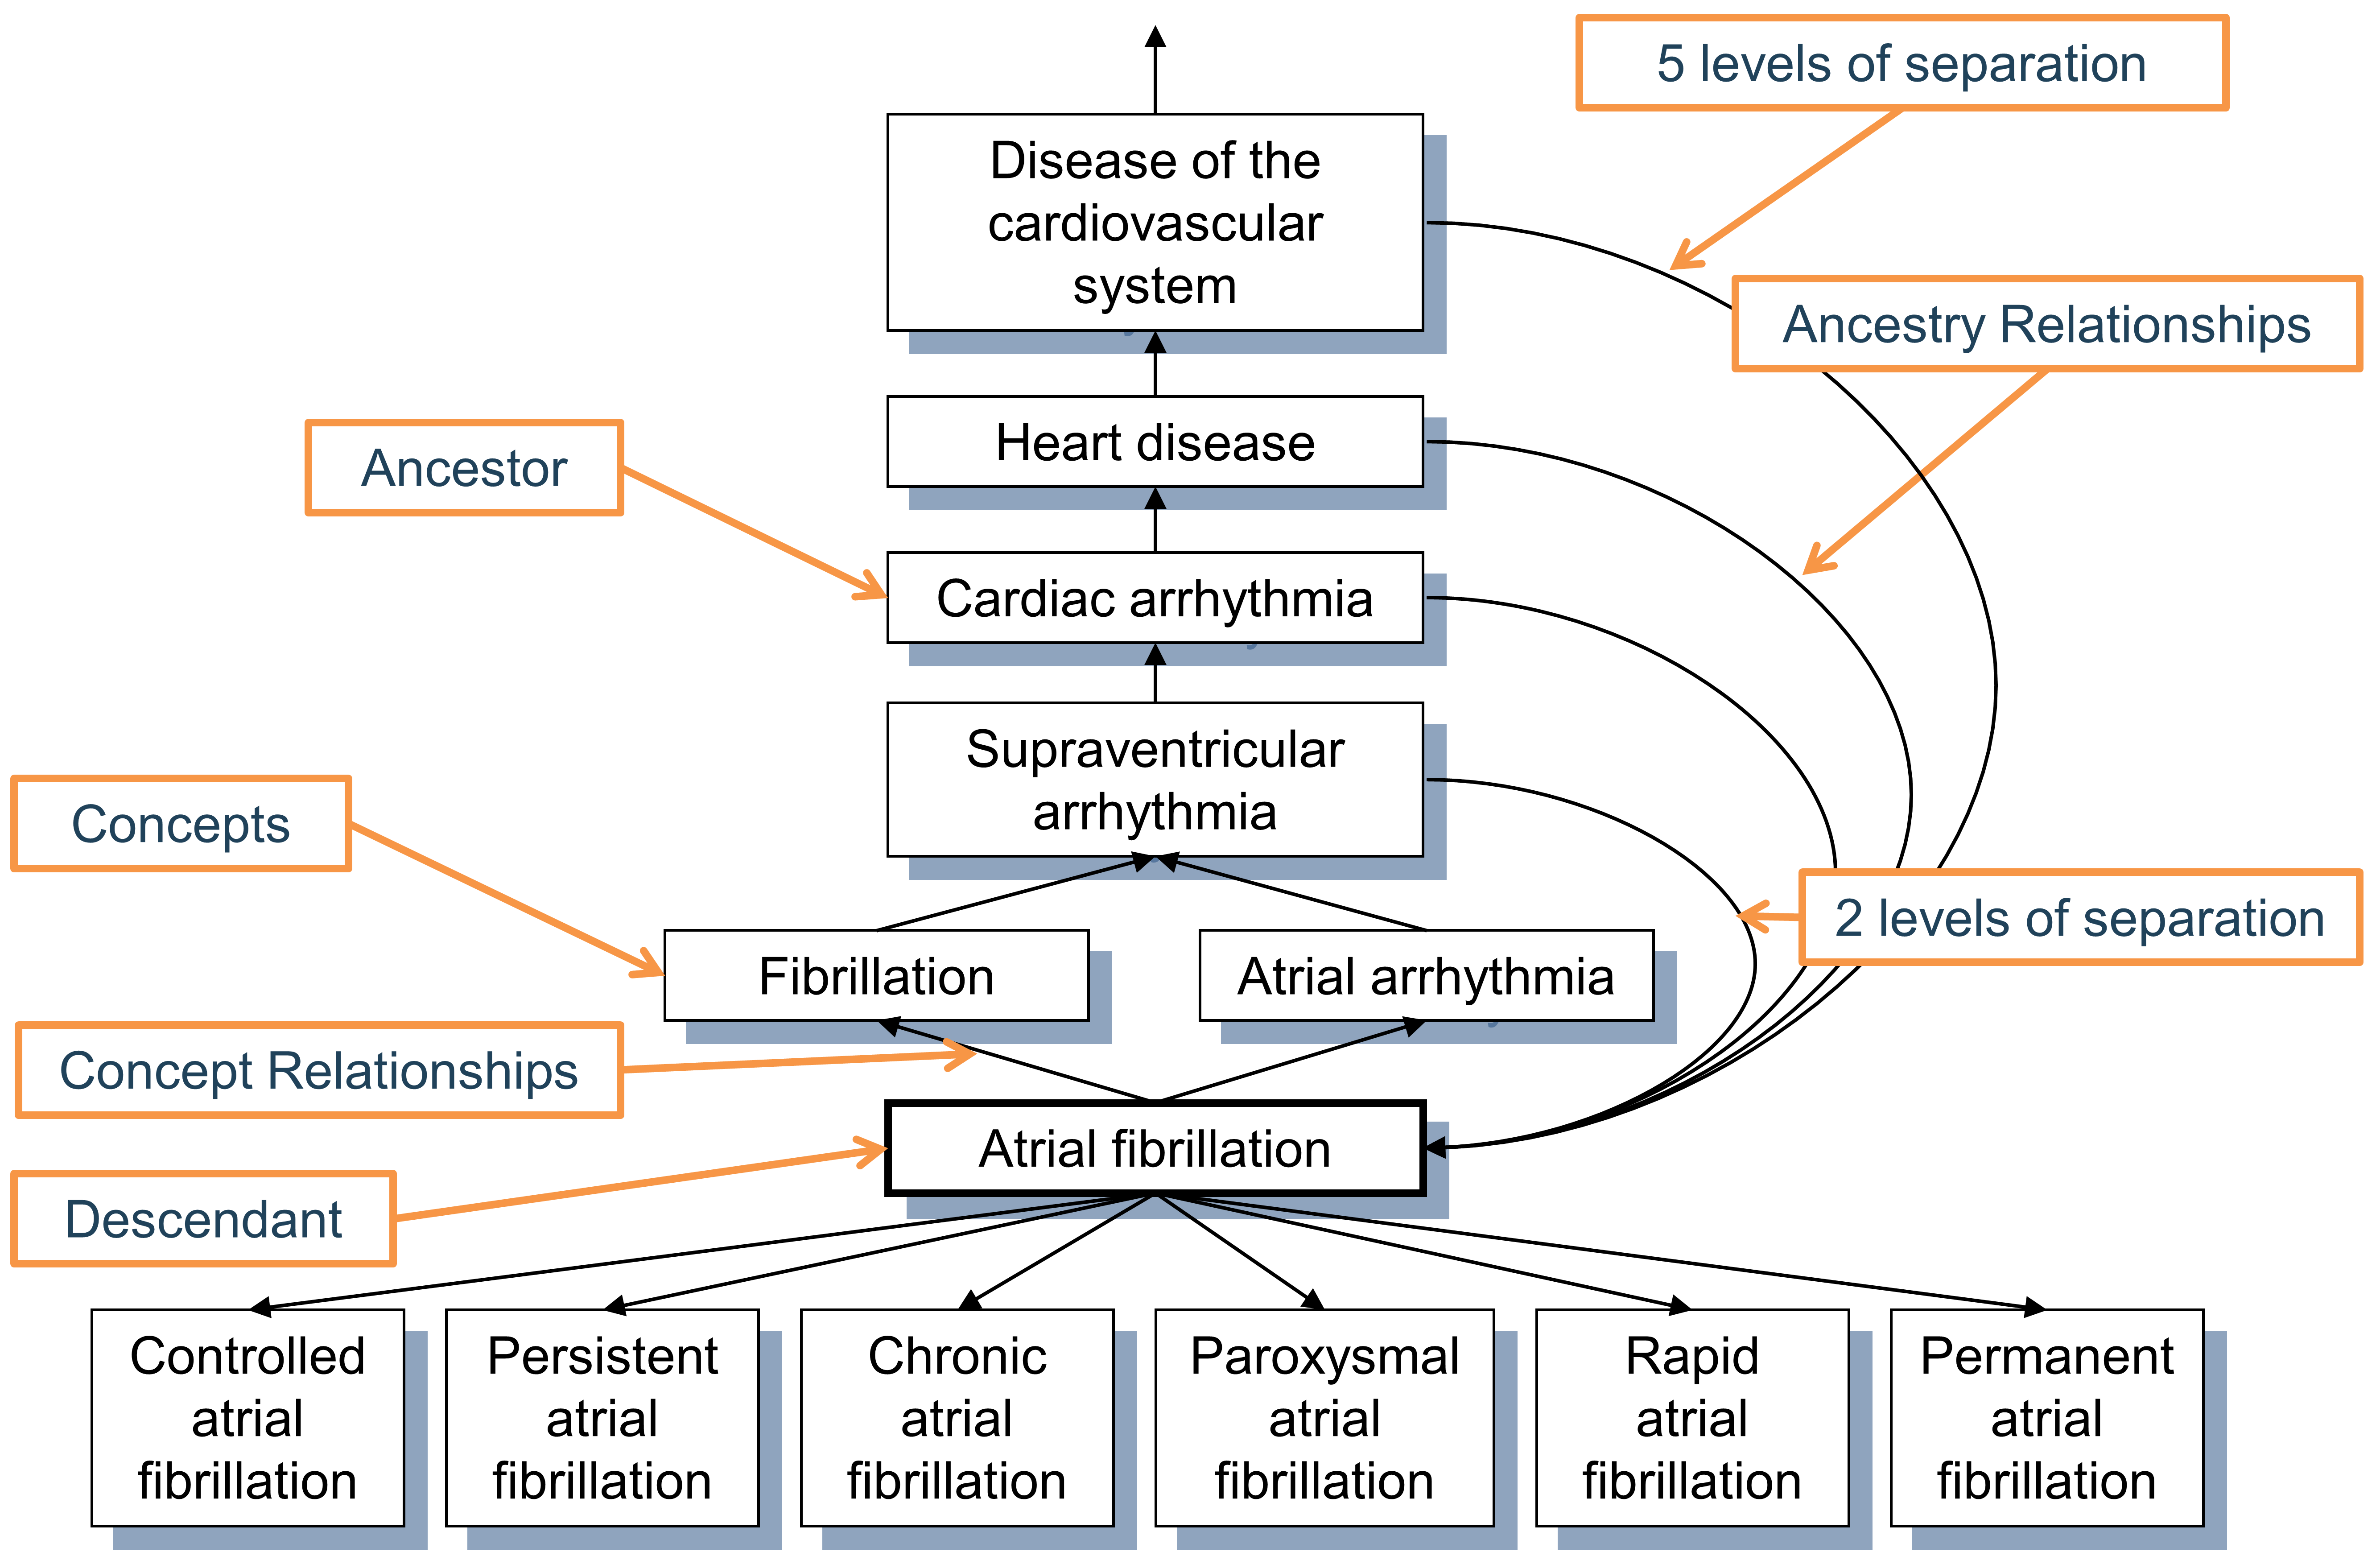 Hierarchy of the condition “Atrial fibrillation.” First degree ancestry is defined through “Is a” and “Subsumes” relationships, while all higher degree relations are inferred and stored in the CONCEPT_ANCESTOR table. Each concept is also its own descendant with both levels of separation equal to 0. 